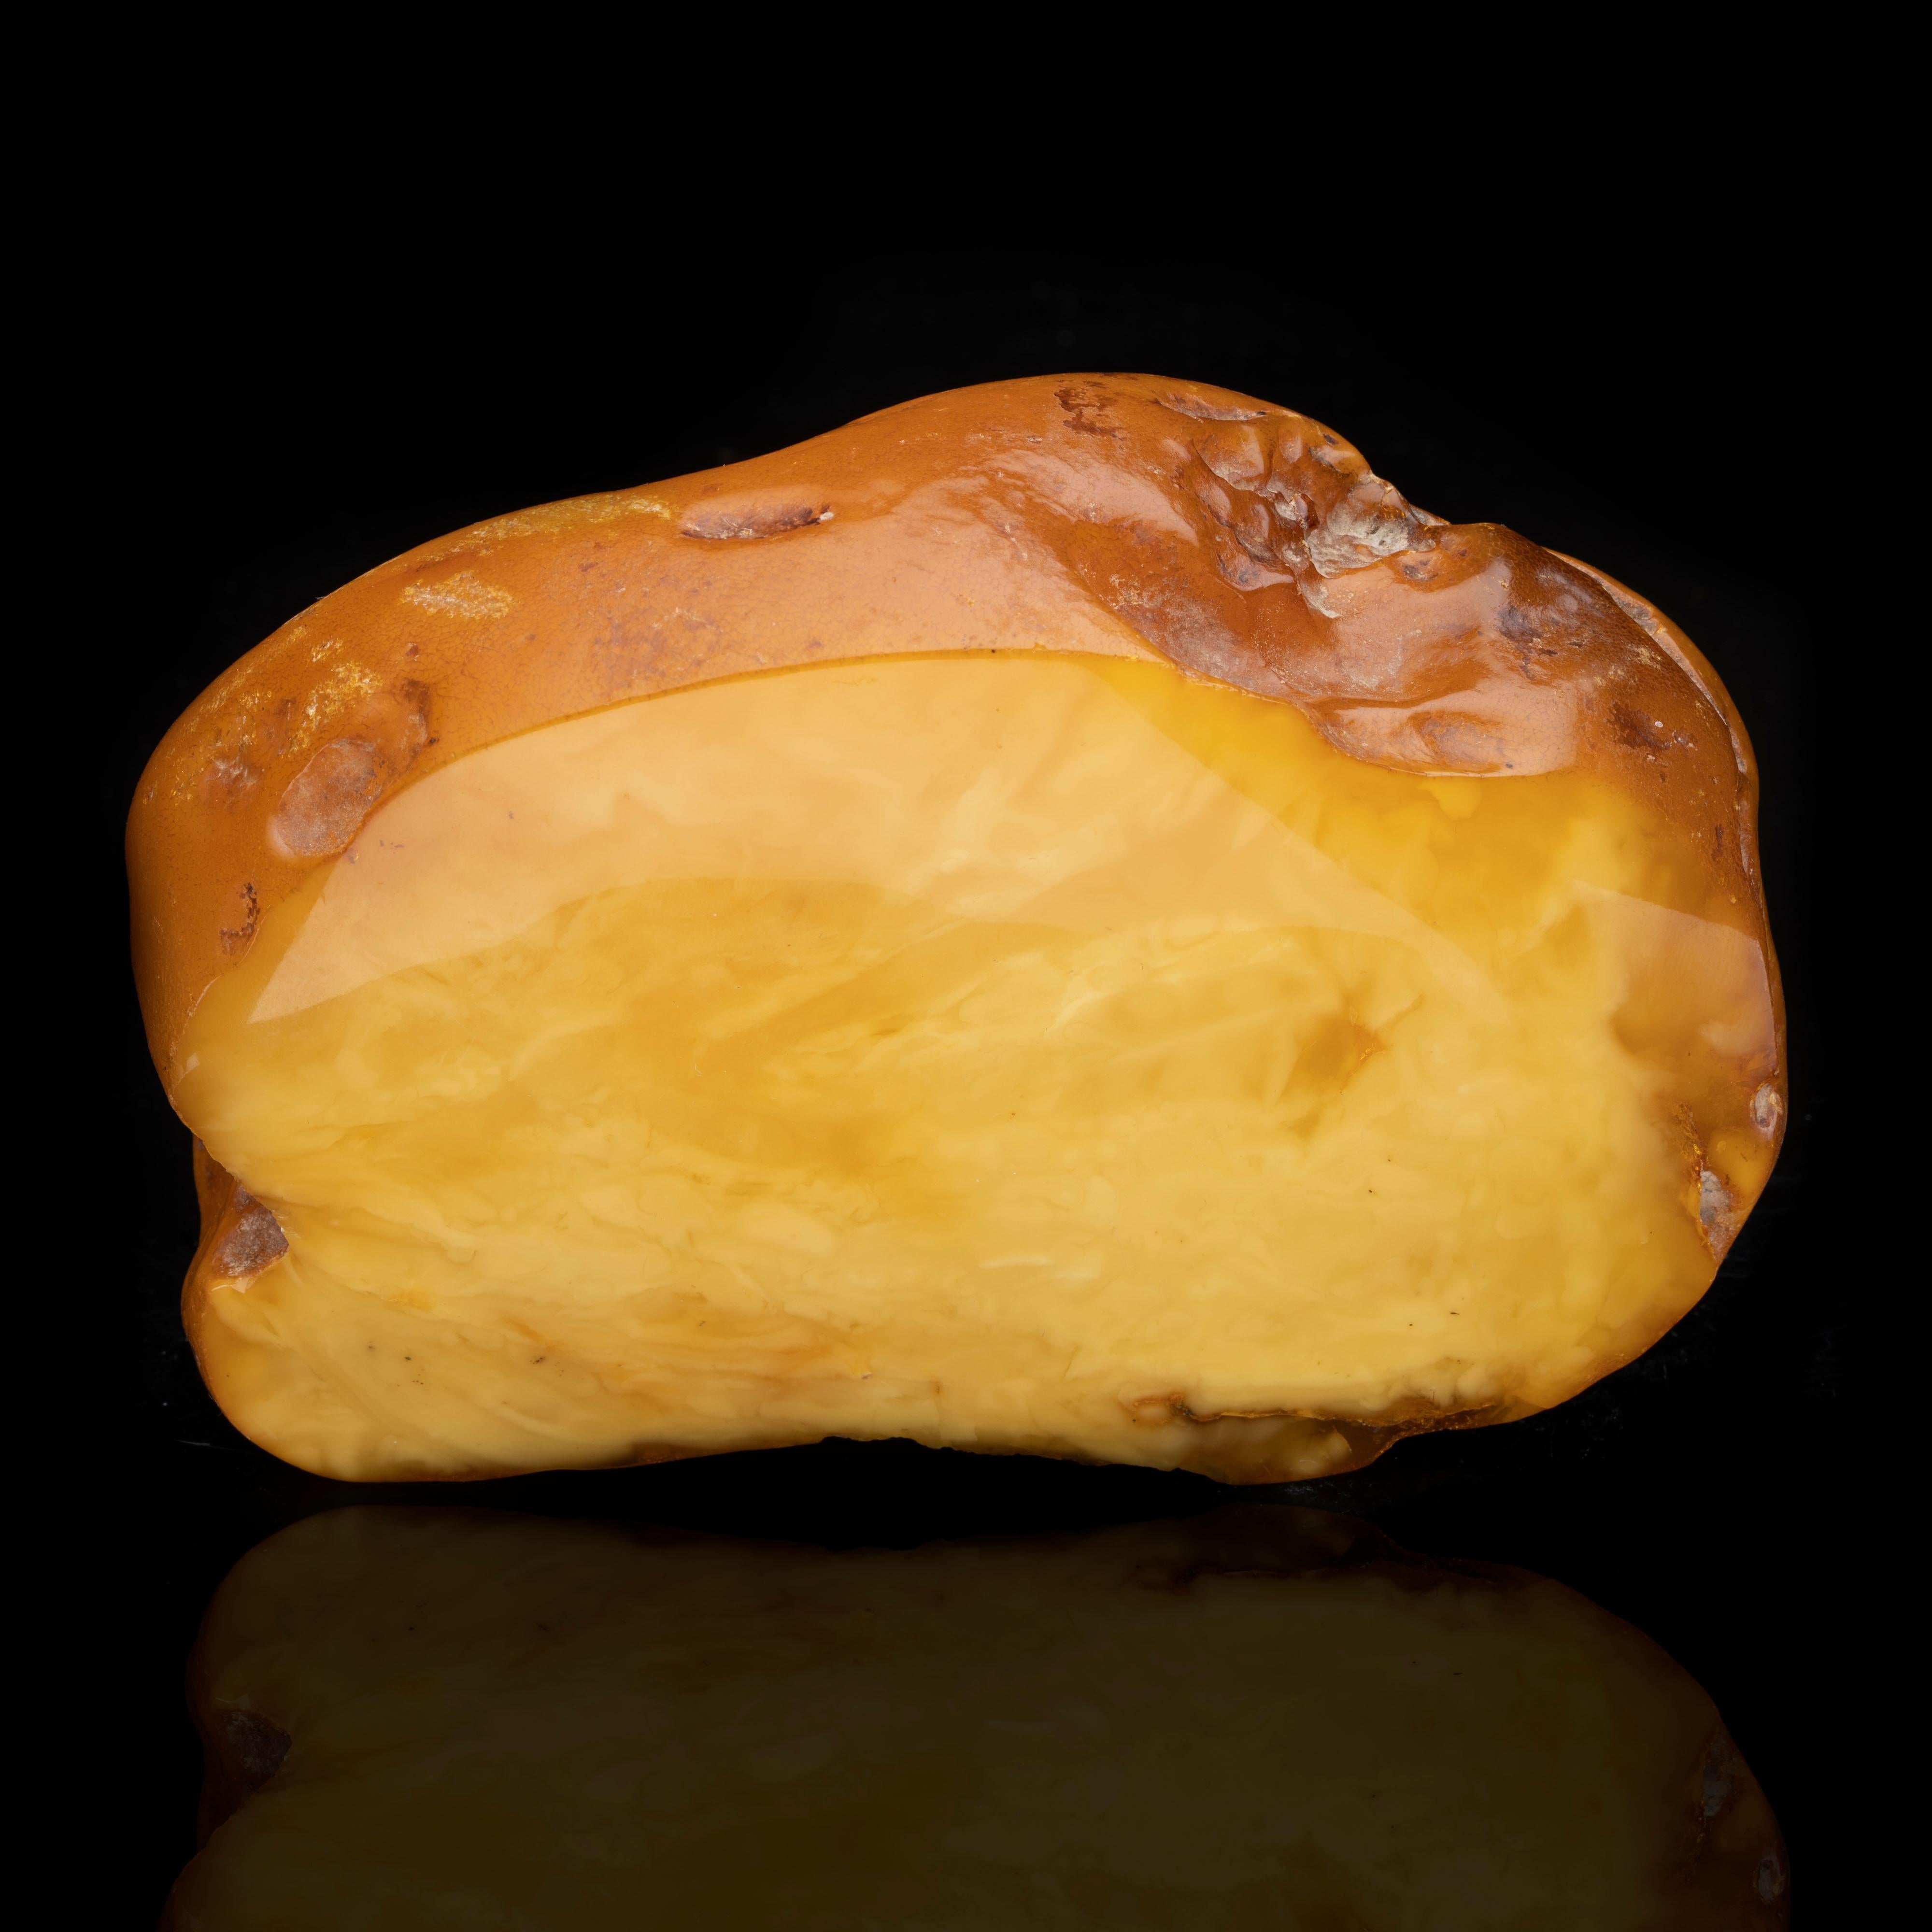 Baltic Region

Amber is fossilized tree resin, which has been appreciated for its color and natural beauty since Neolithic times. This is an unusually large specimen of butterscotch amber from the Baltic Region. One side is hand-polished; the other